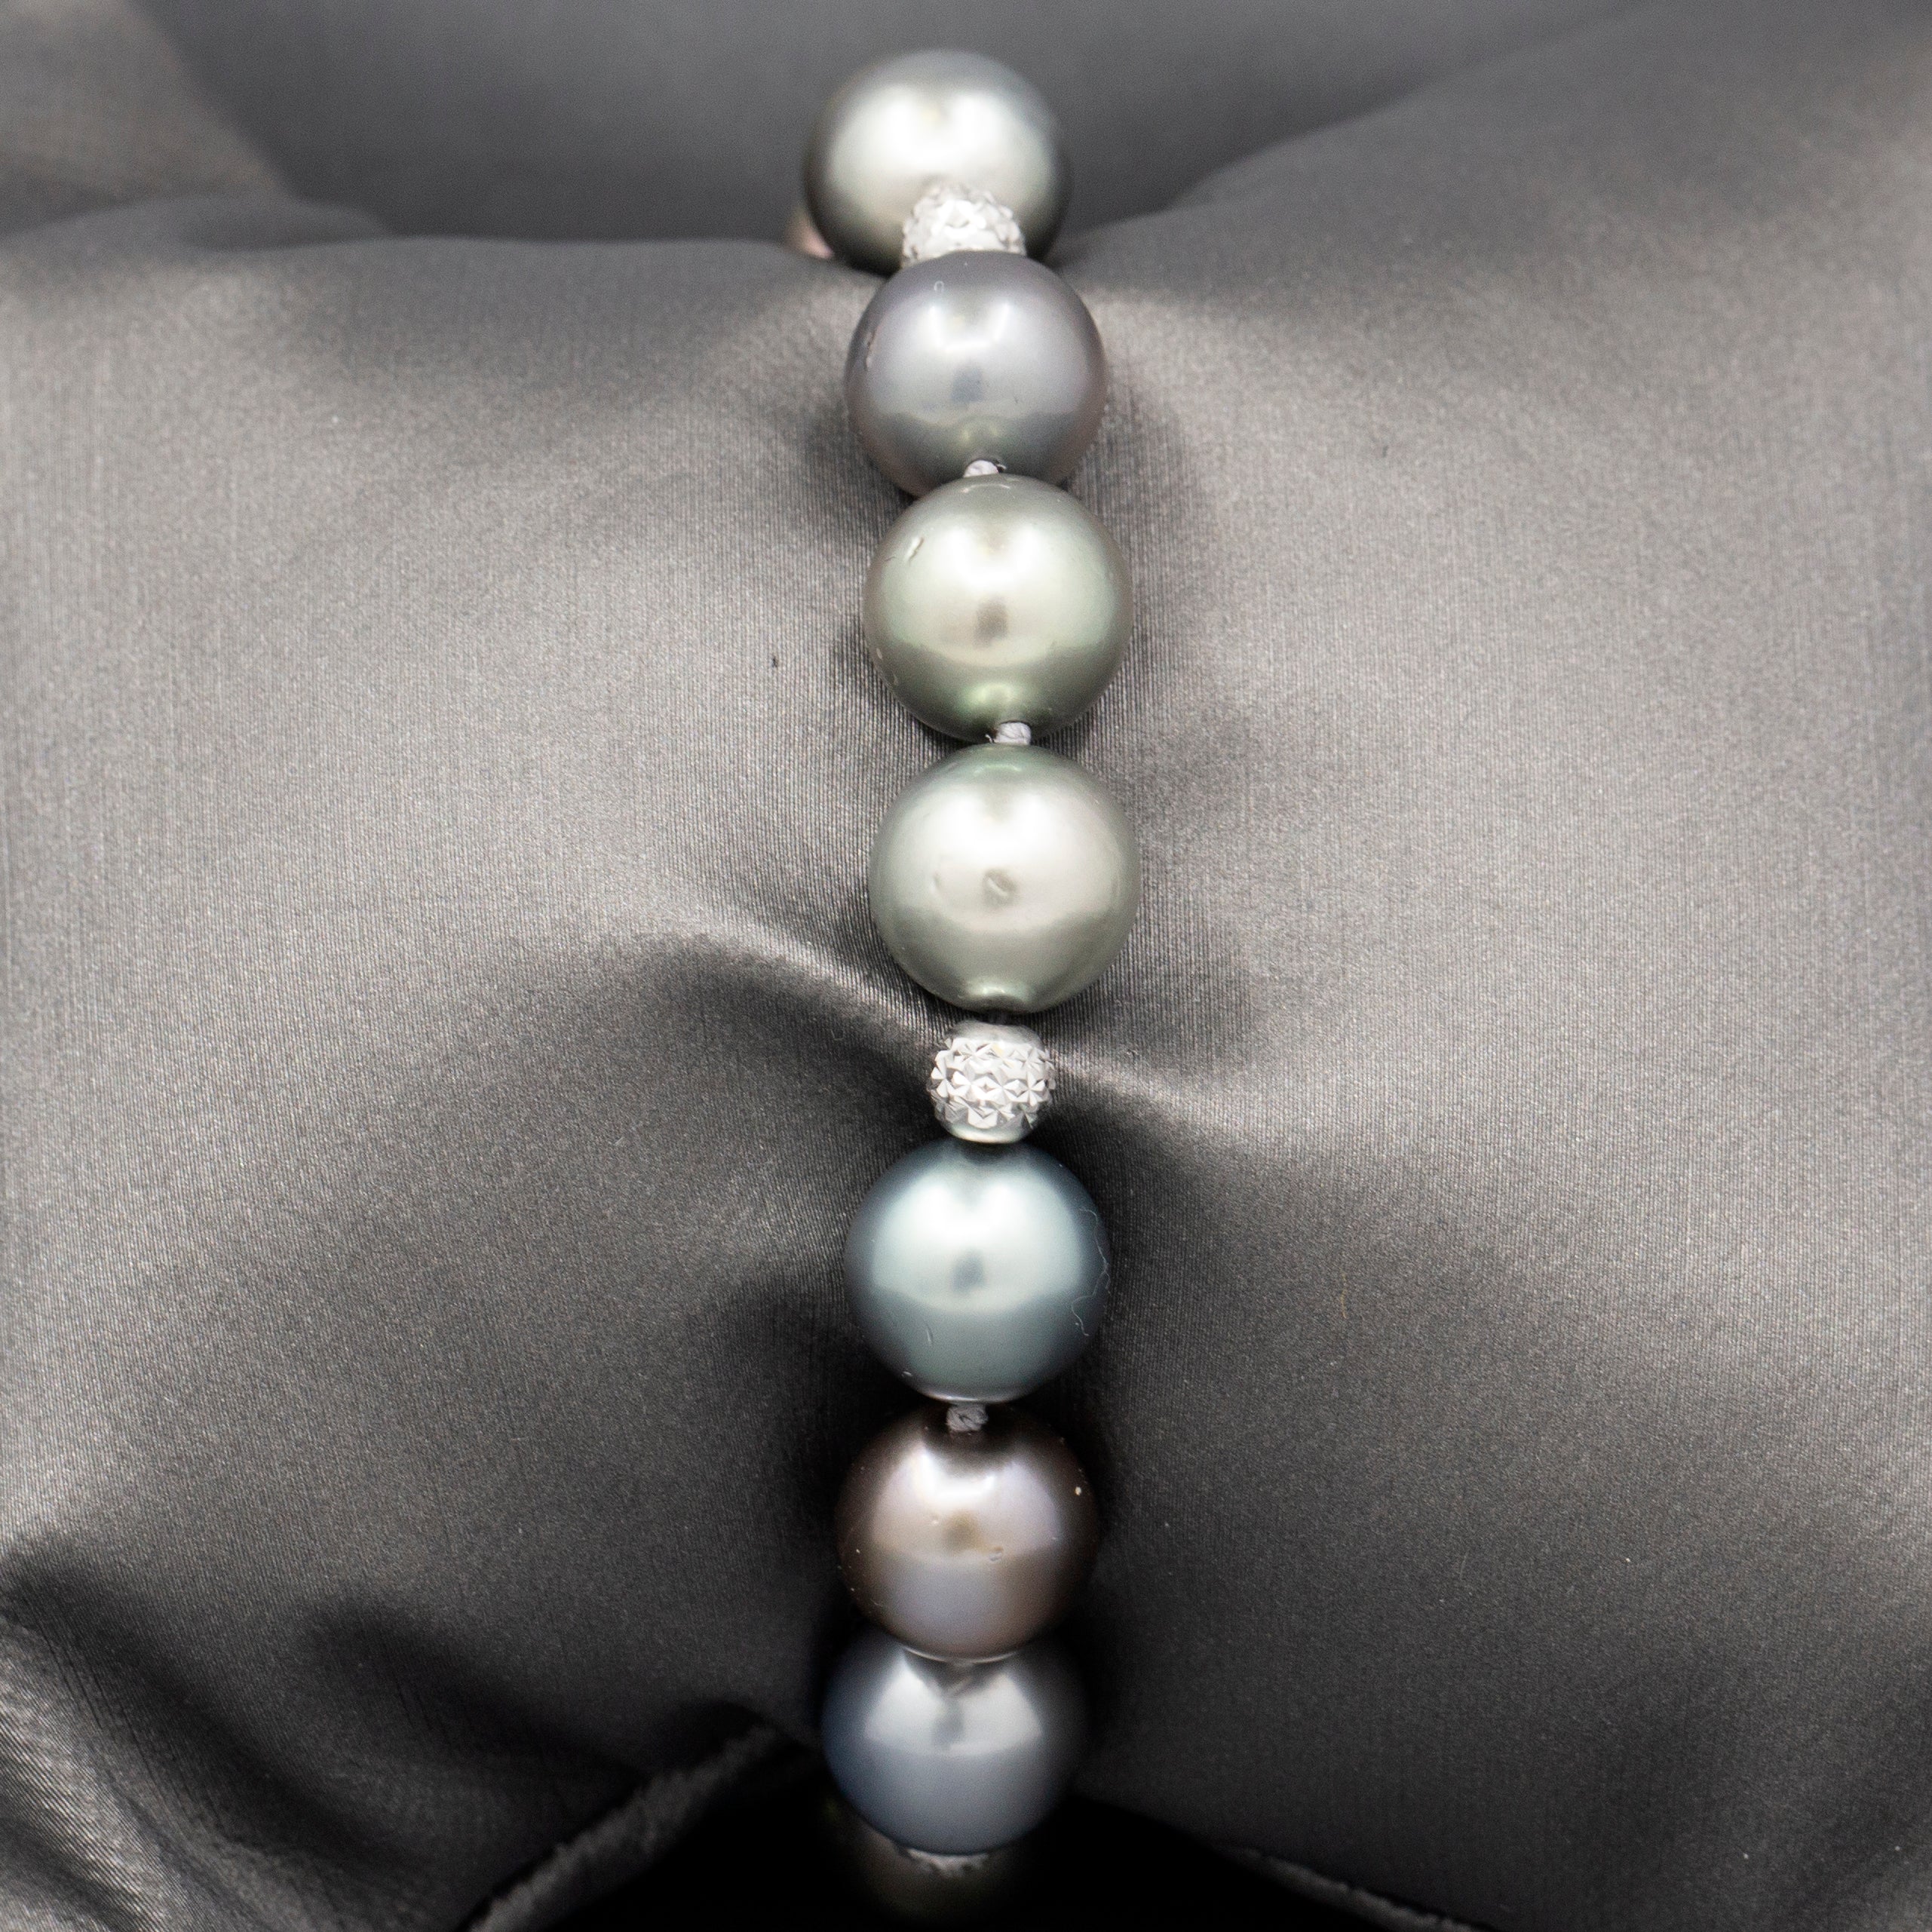 Exquisite Multi Color Tahitian Pearl Bracelet in 18k White and Yellow Gold